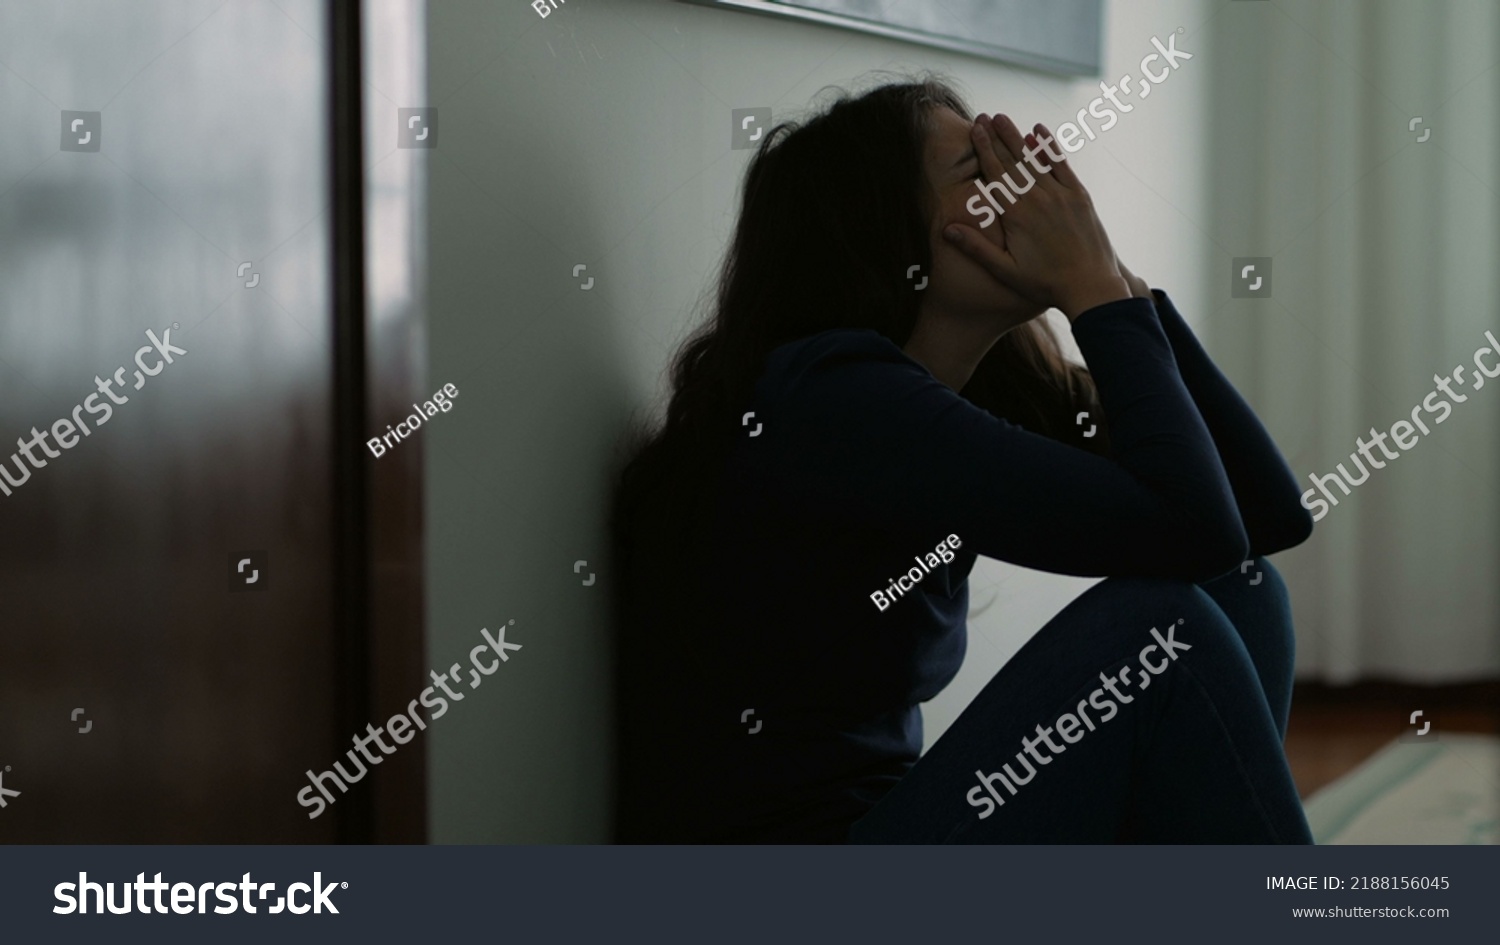 Woman feeling emotional pain sitting on floor home being desperate covering face with shame #2188156045